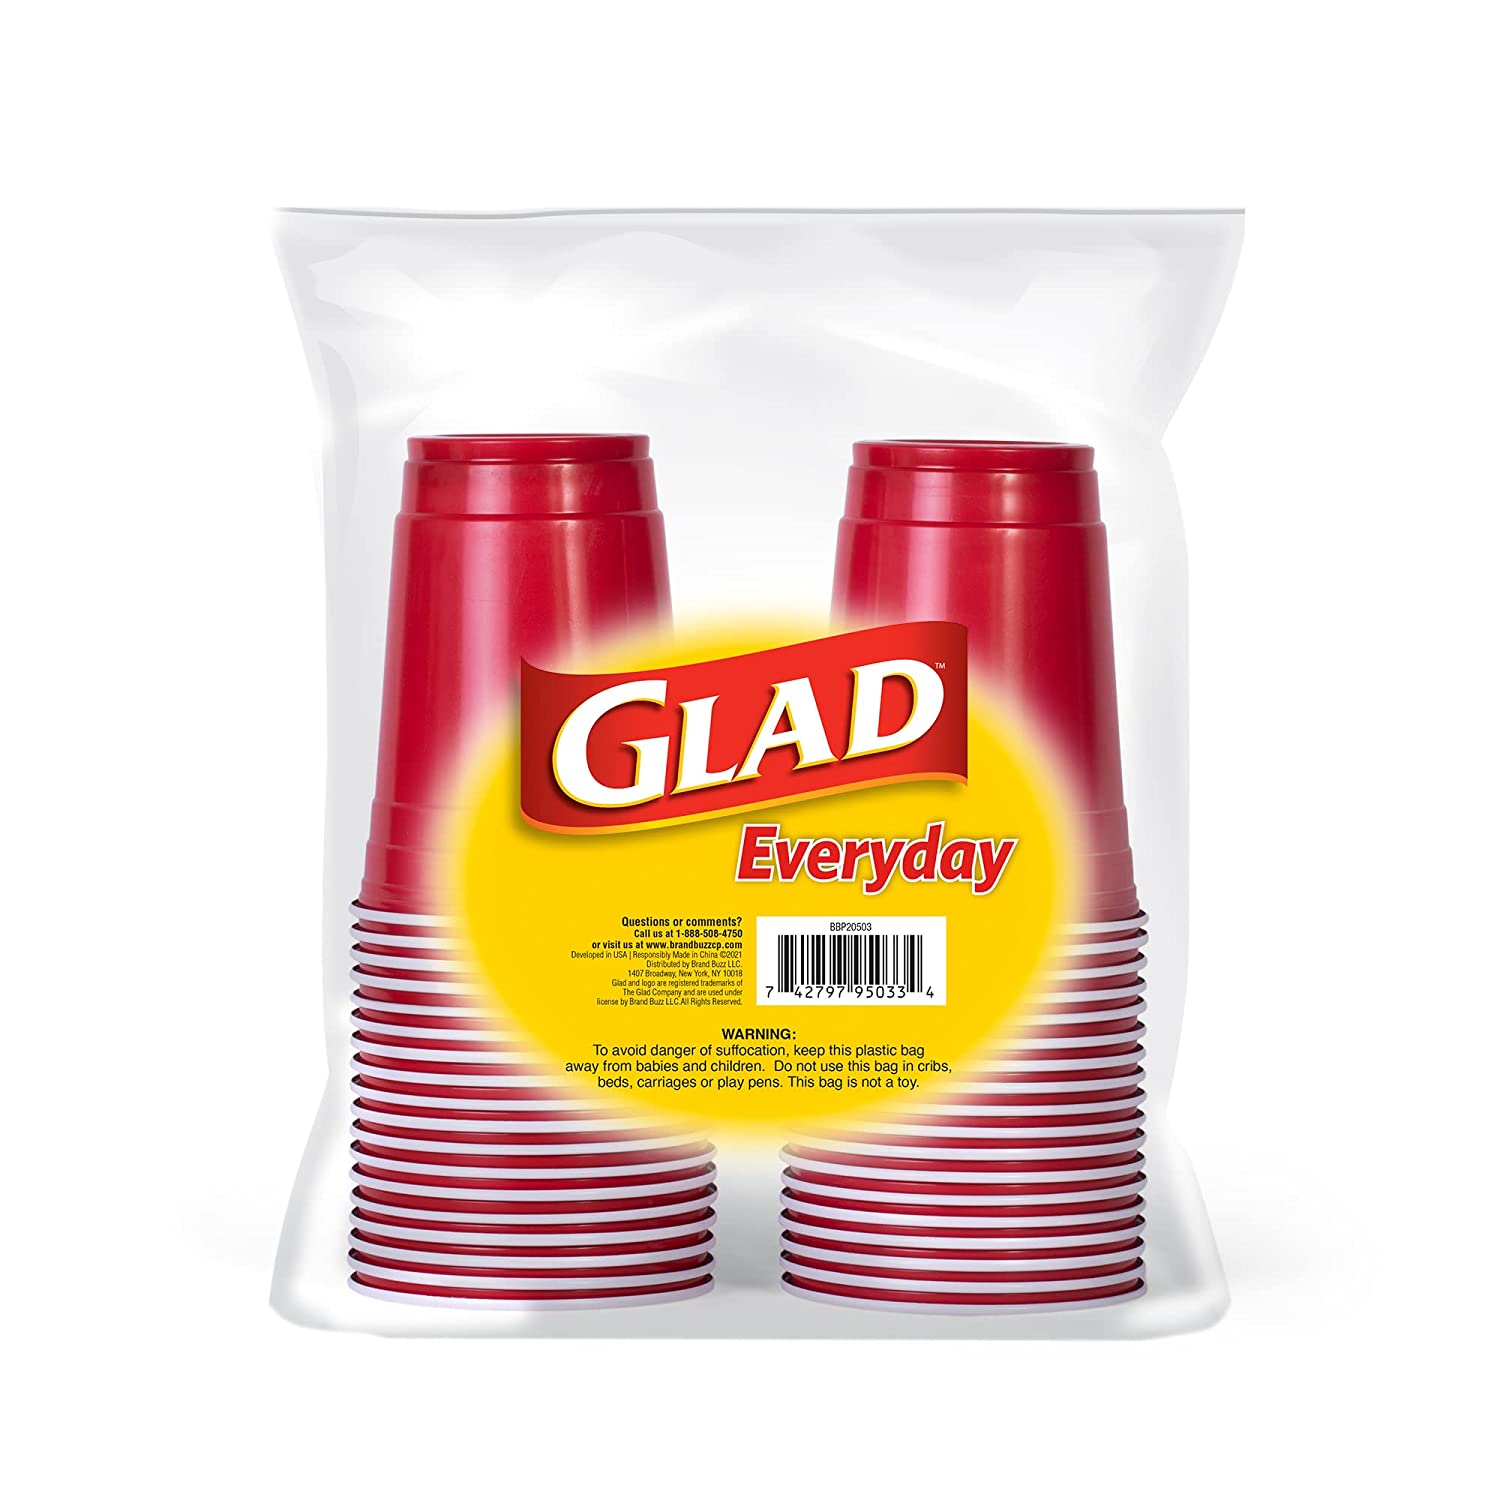 Glad Everyday Plastic Cups 18oz 36ct Red | Red Plastic Cups, 36 Count | Strong A